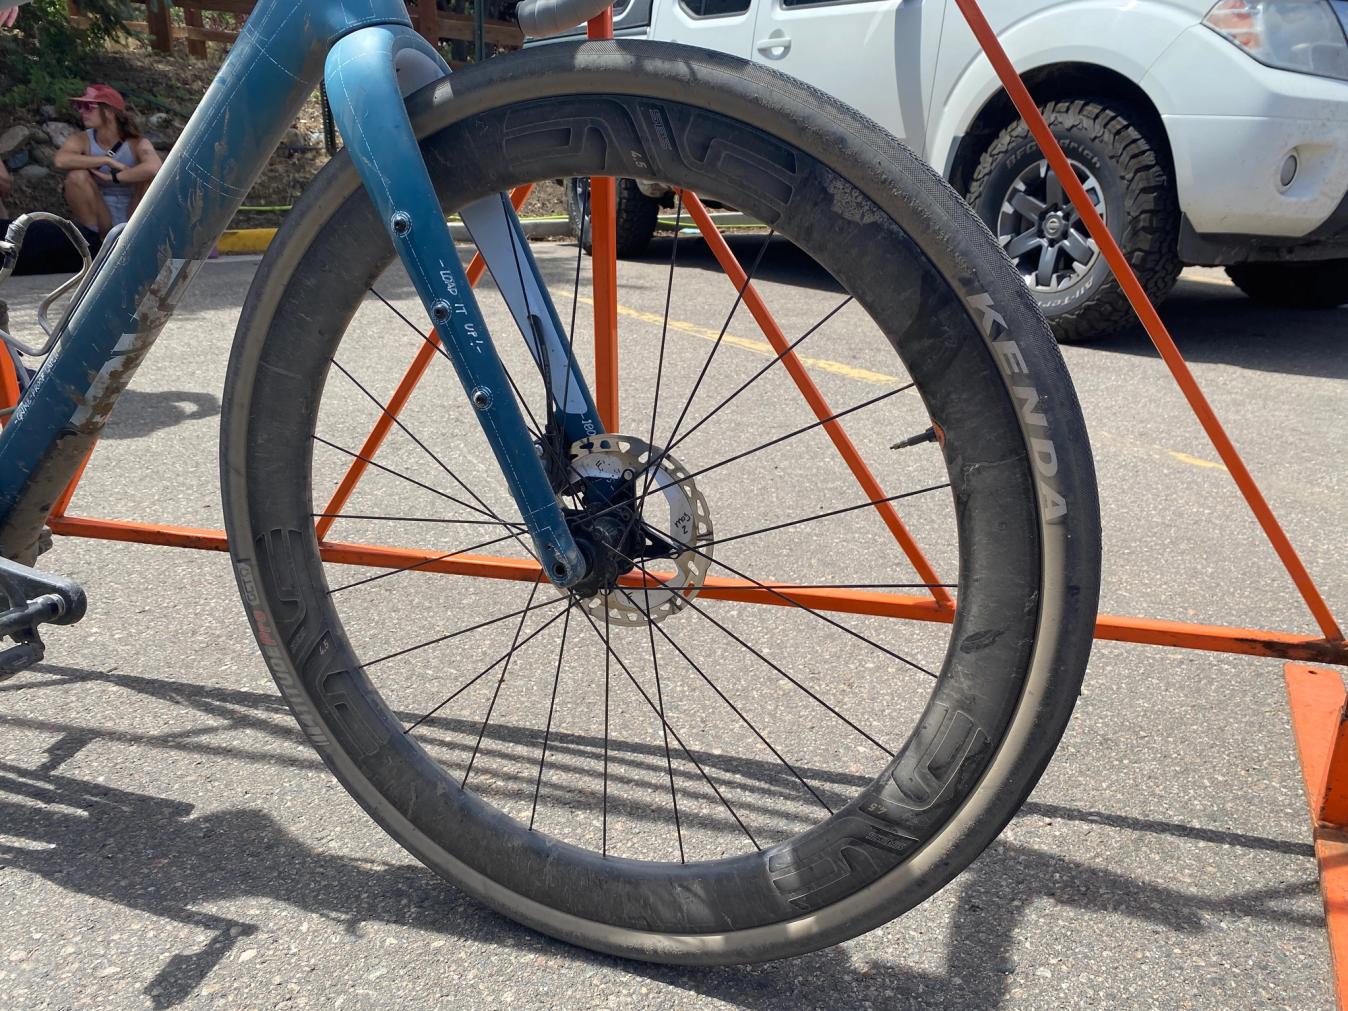 The ENVE SES 4.5 and Kenda tires that piloted Vermeulen on the "champagne of gravel"